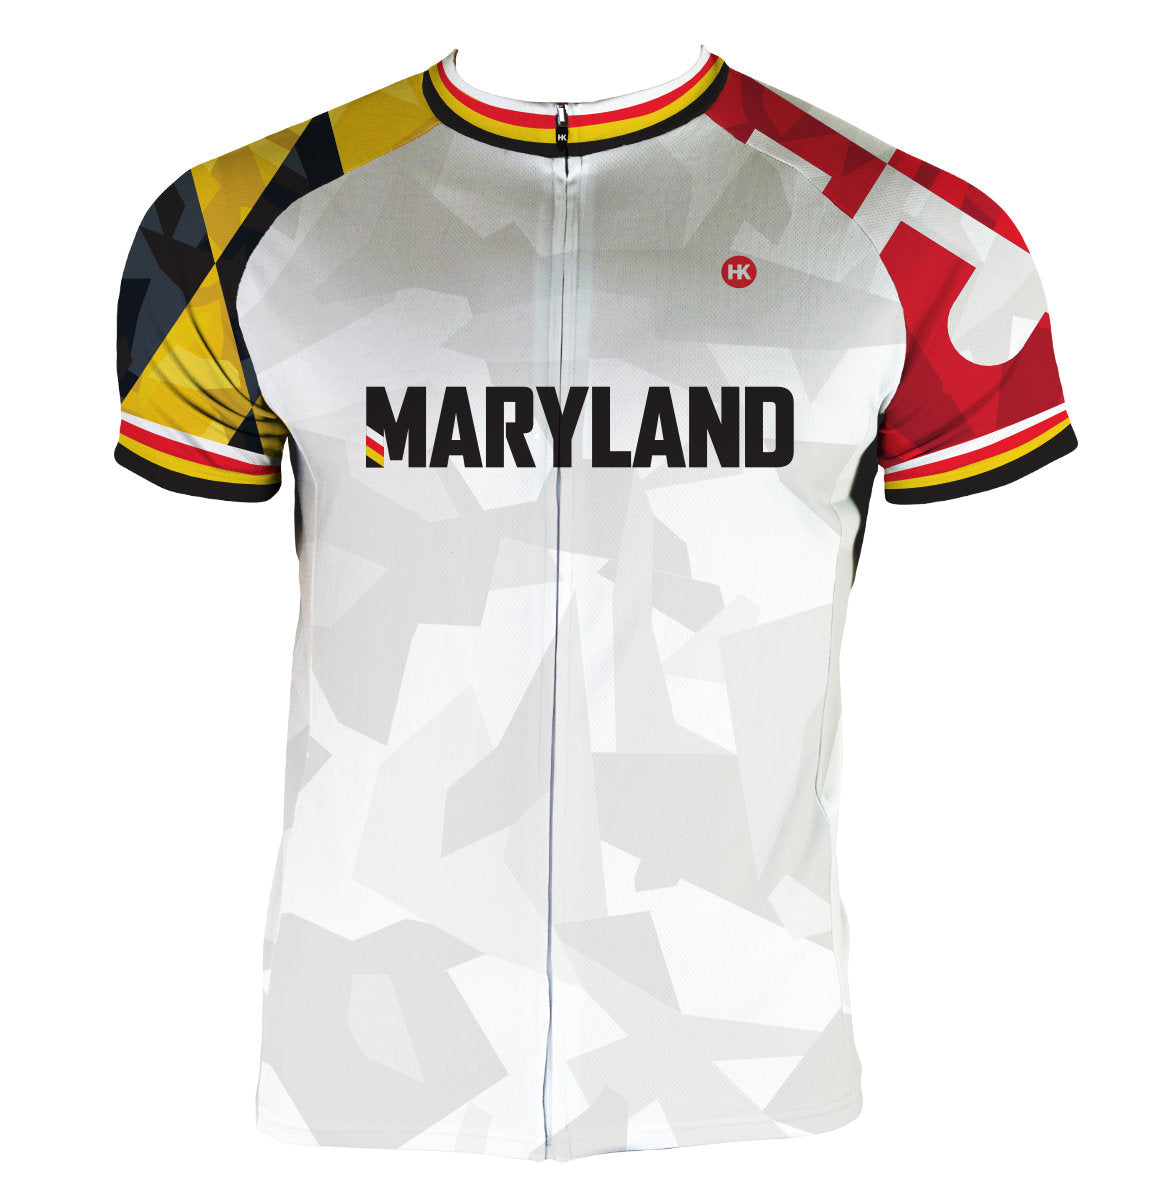 Maryland Recon White Jersey FINAL SALE SMALL & 3XL ONLY